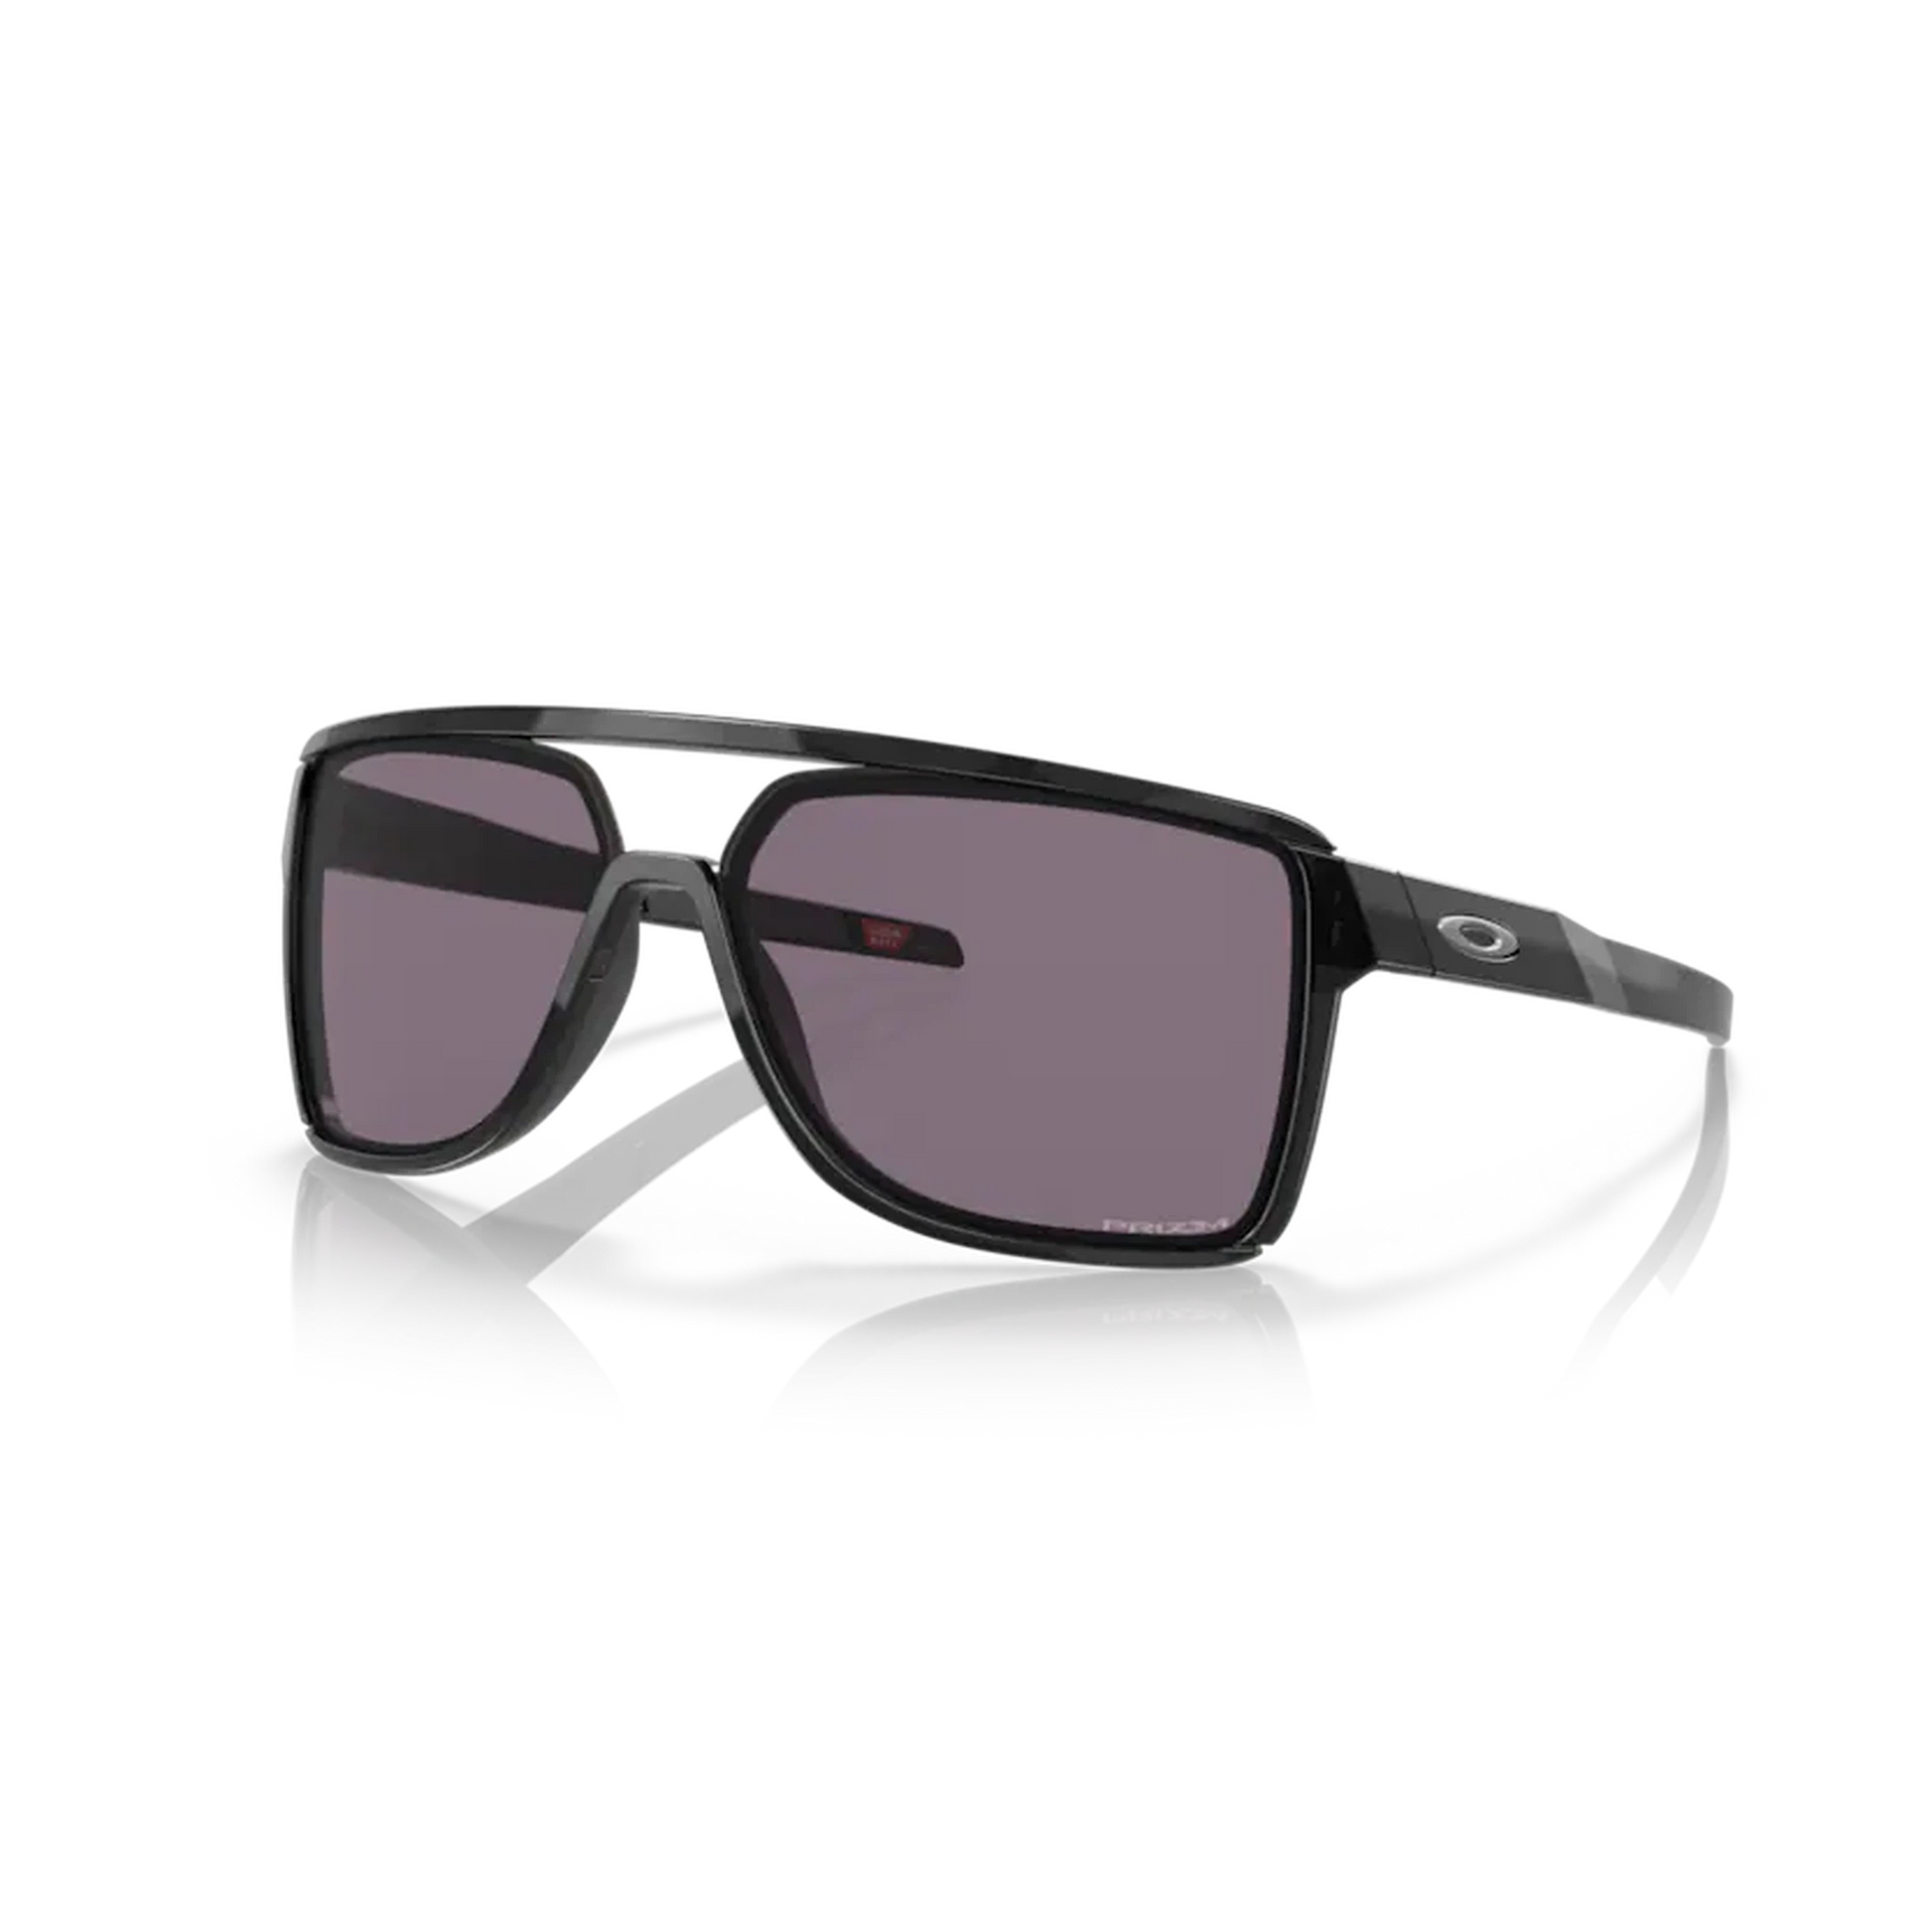 Oakley Castel | Complete Cyclist - Oakley® revisits the high wrap frame with Castel, a shield design sunglass with a more relaxed silhouette than its predecessors. Castel features an O-Matter™ frame, which provides lightweight durability, as well a three-point fit design for comfort.